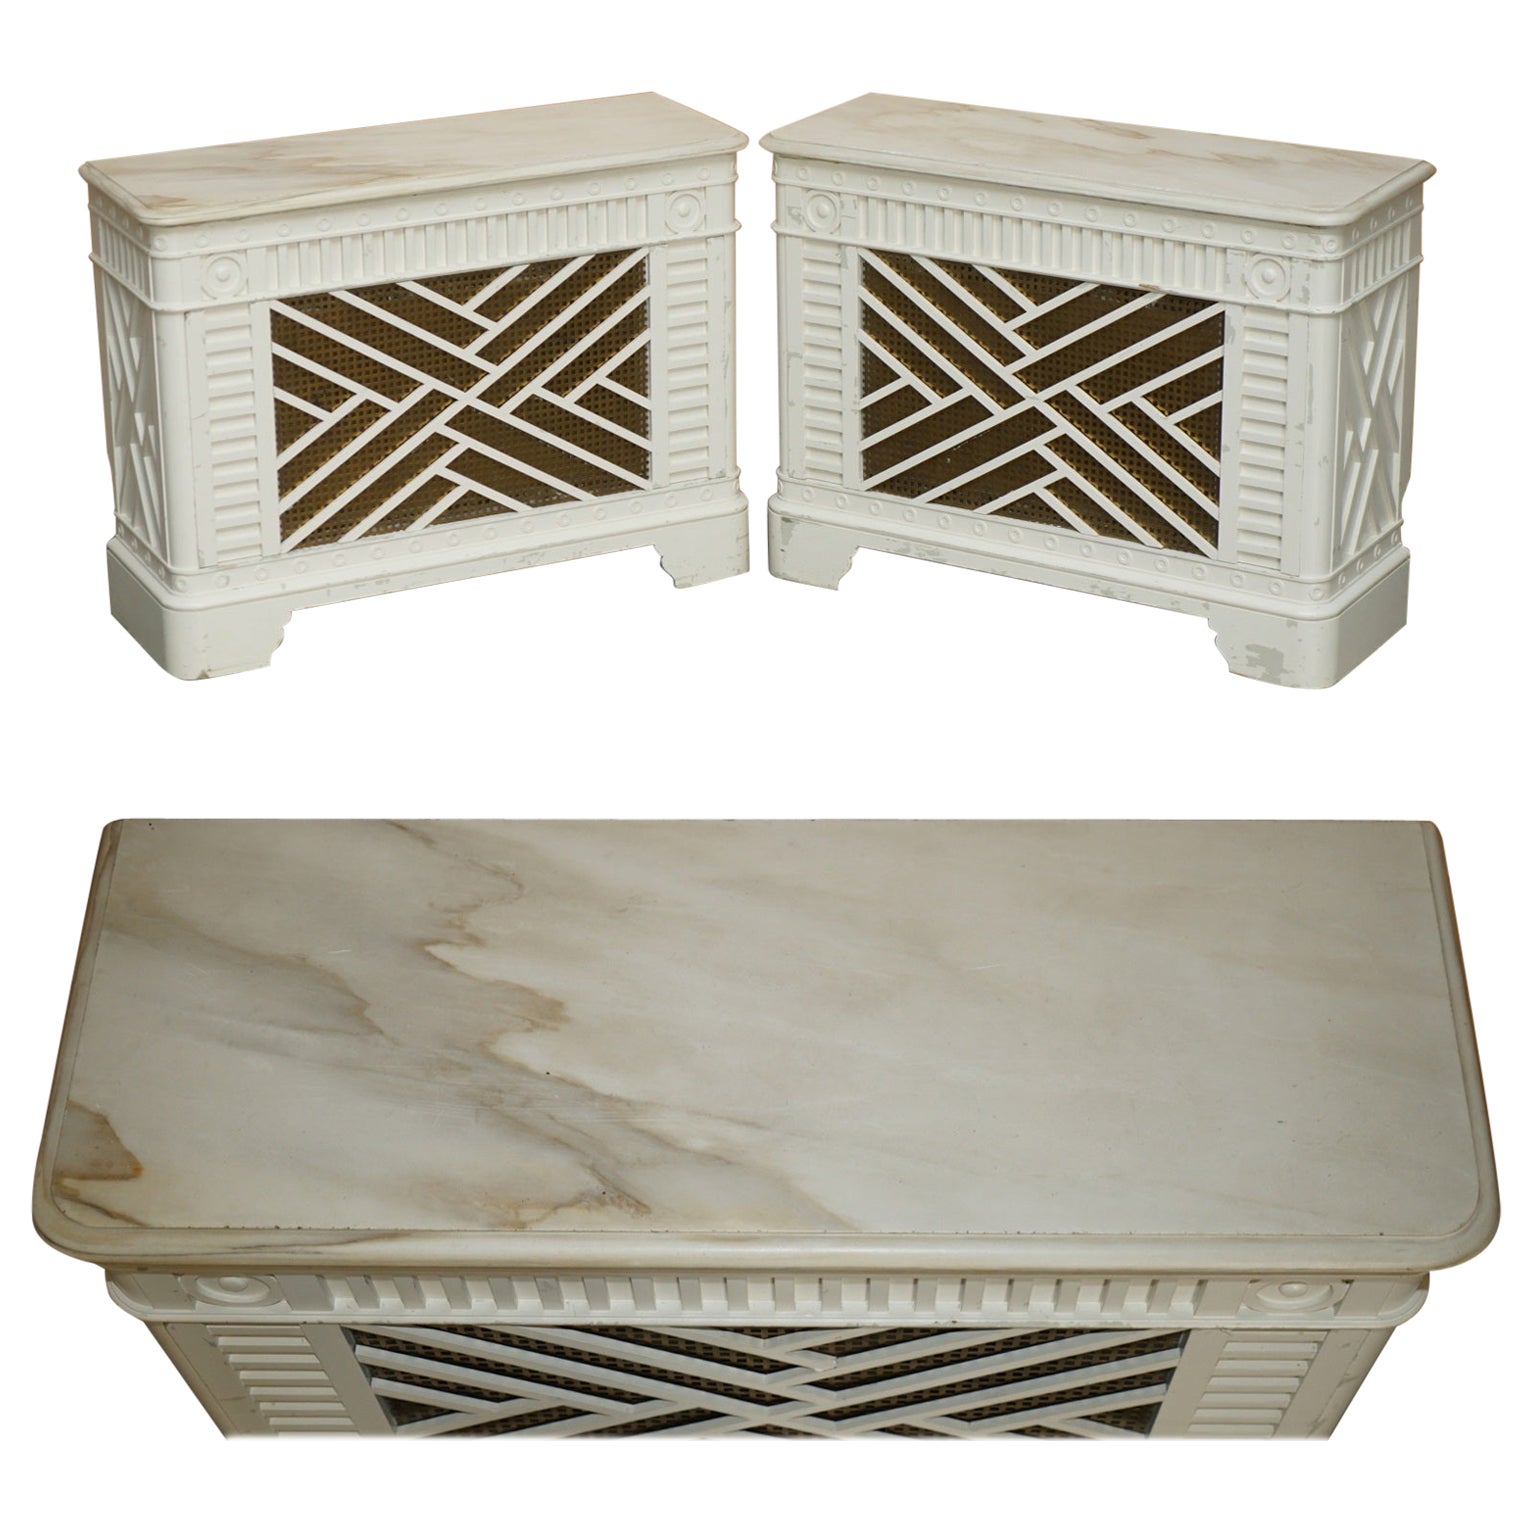 PAIR OF ViNTAGE ITALIAN CARRARA MARBLE TOPPED RADIATOR COVERS REMOVABLE FRONTS For Sale